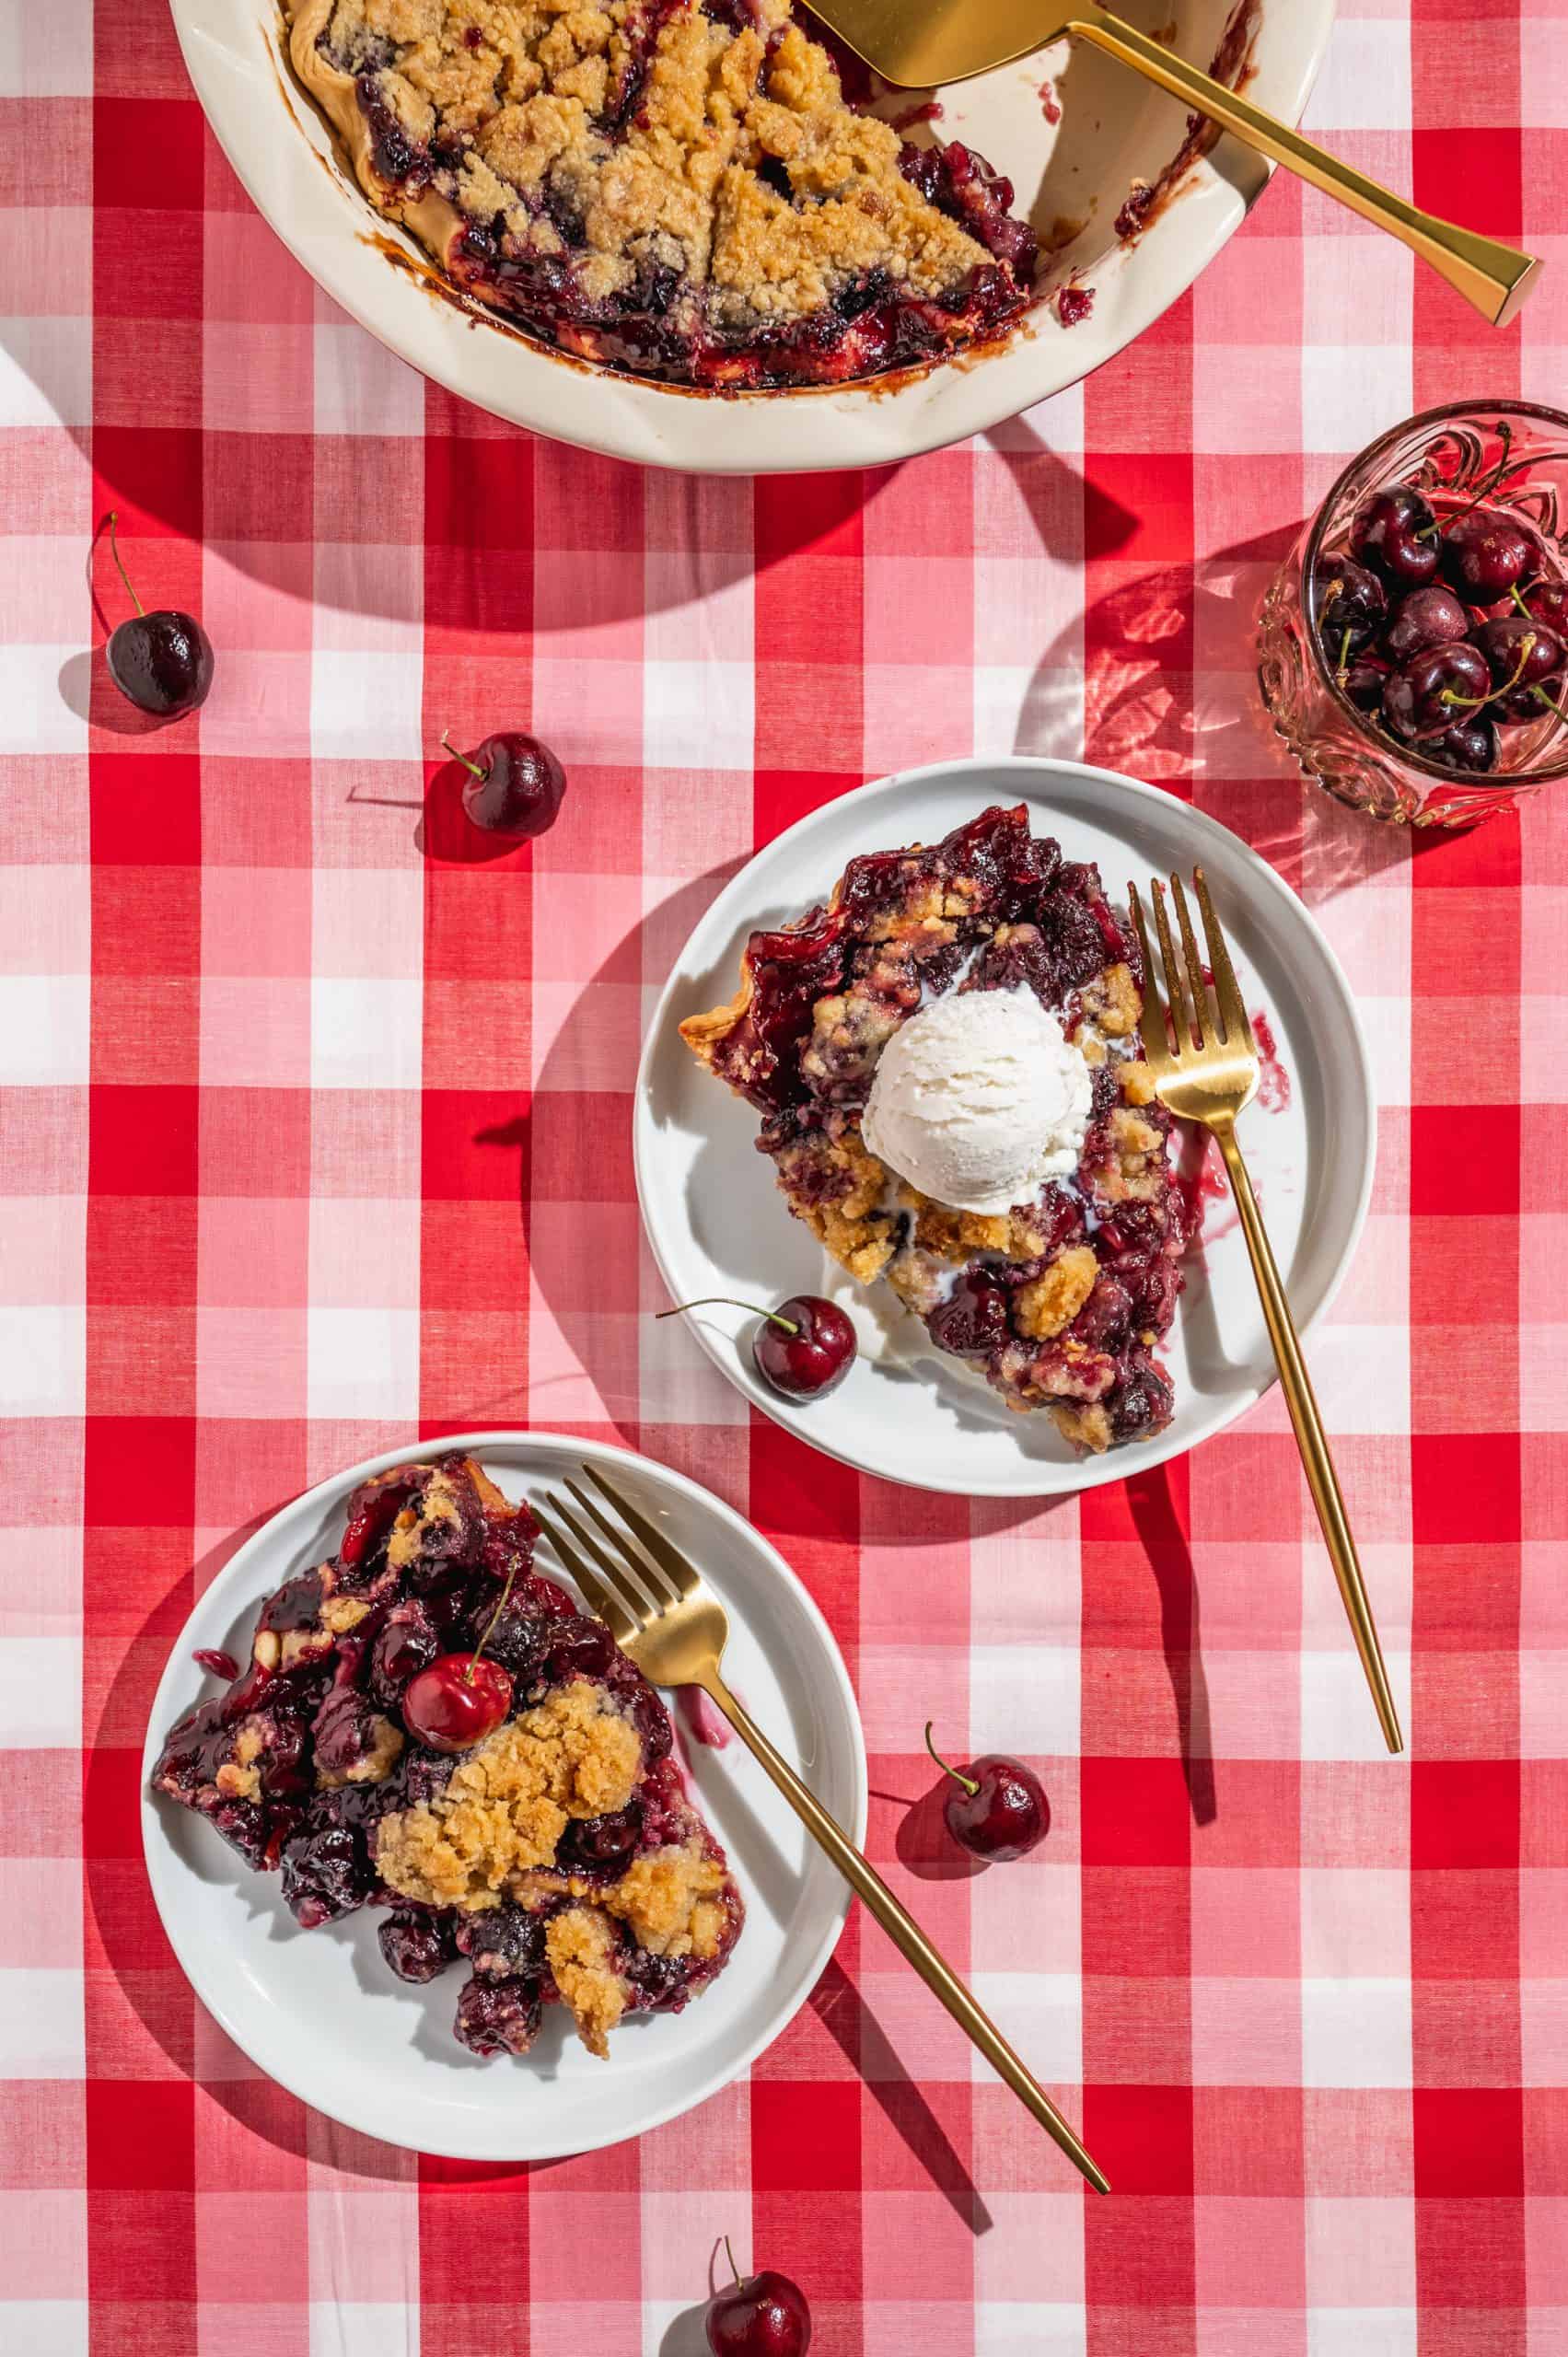 two slices on cherry crumble pie on white plates with gold forks on a checkered red tablecloth